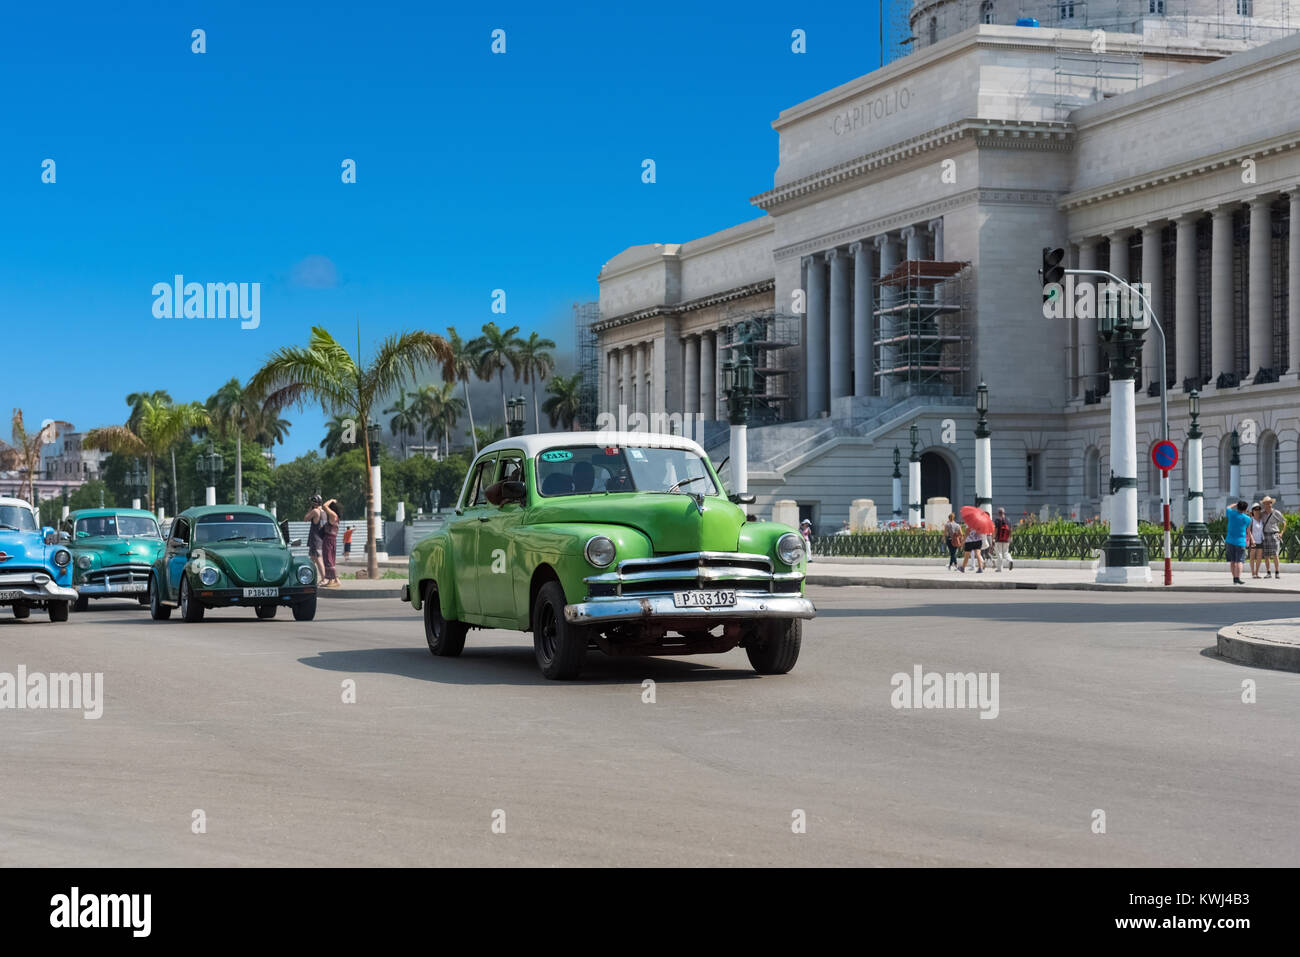 American green Dodge classic car with a white roof drive before the Capitolio on the main street in Havana City Cuba - Serie Cuba Reportage Stock Photo